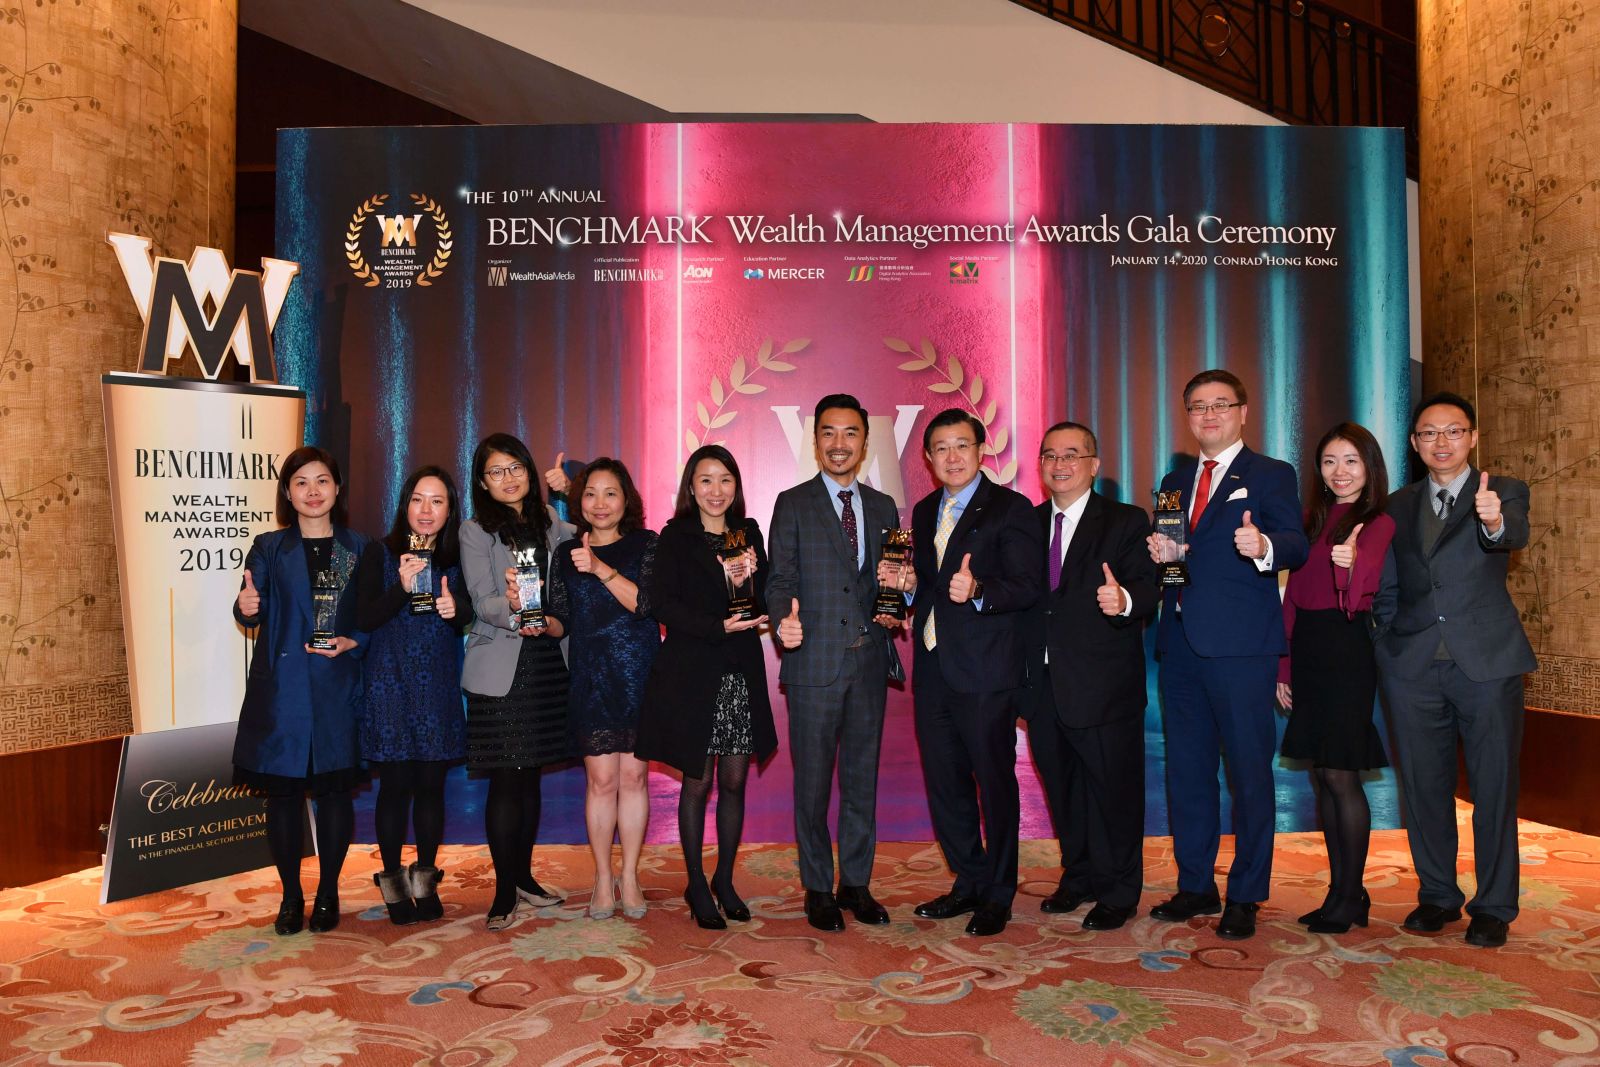 FTLife won 7 awards at the 10th Annual BENCHMARK Wealth Management Awards